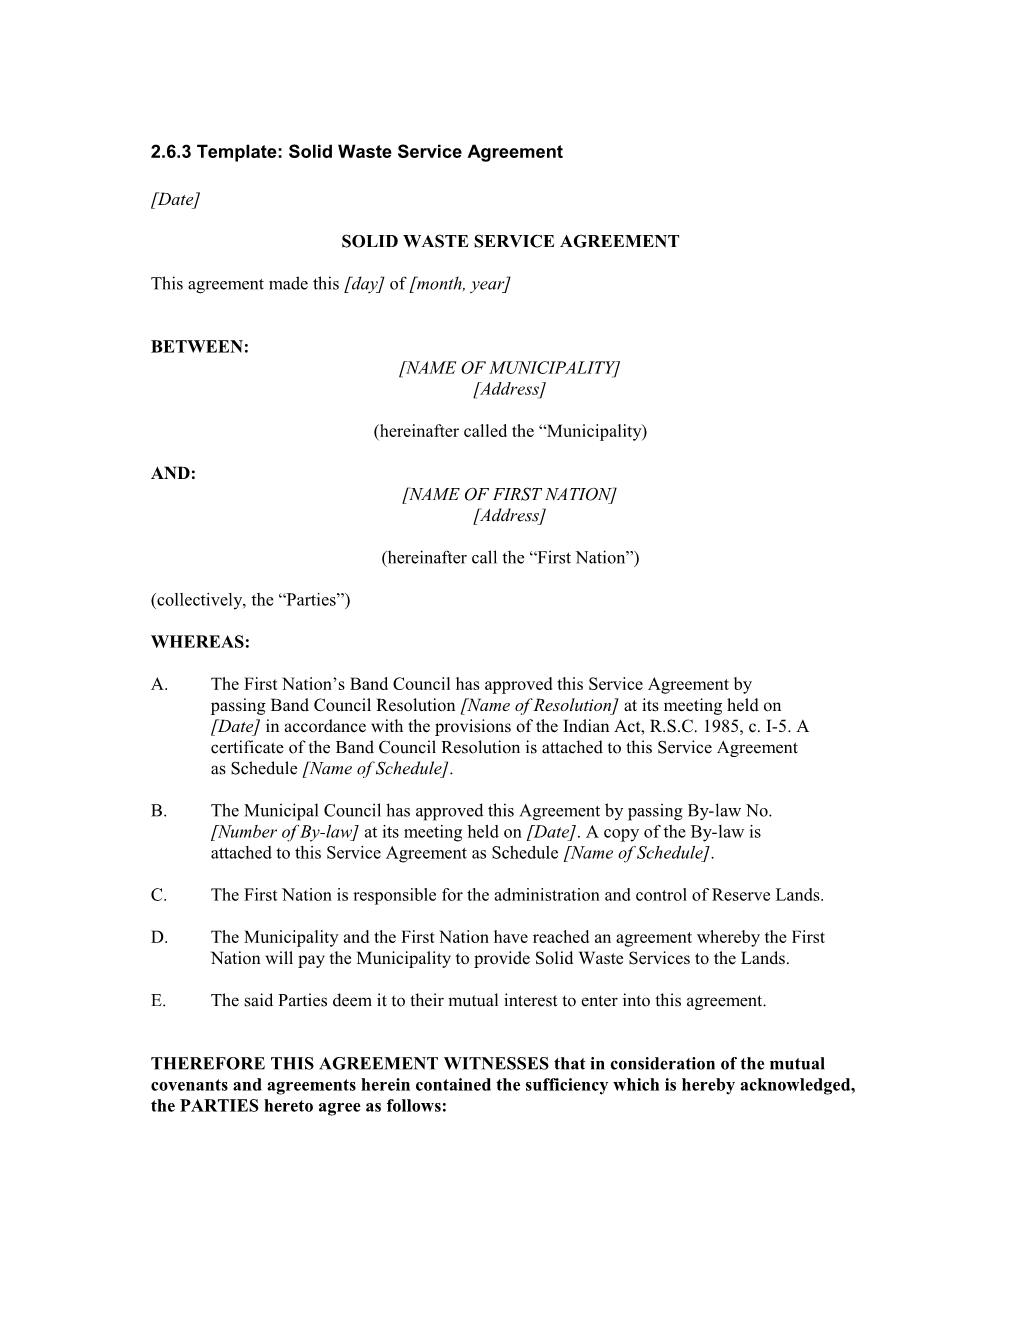 2.6.3 Template: Solid Waste Service Agreement